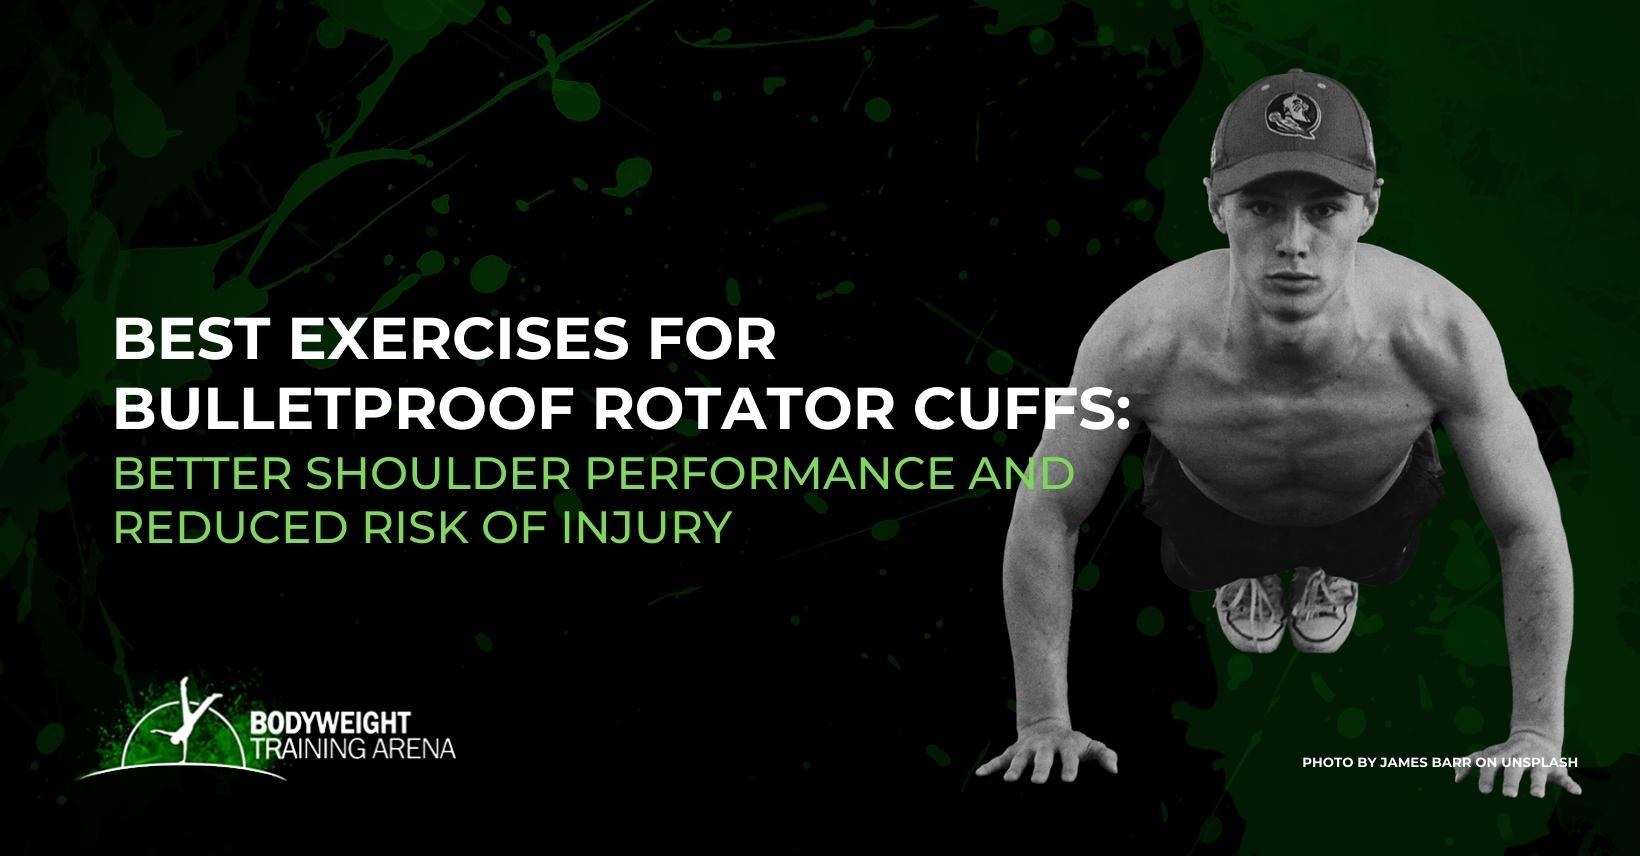 Best exercises for bulletproof rotator cuffs – Better shoulder performance and reduced risk of injury